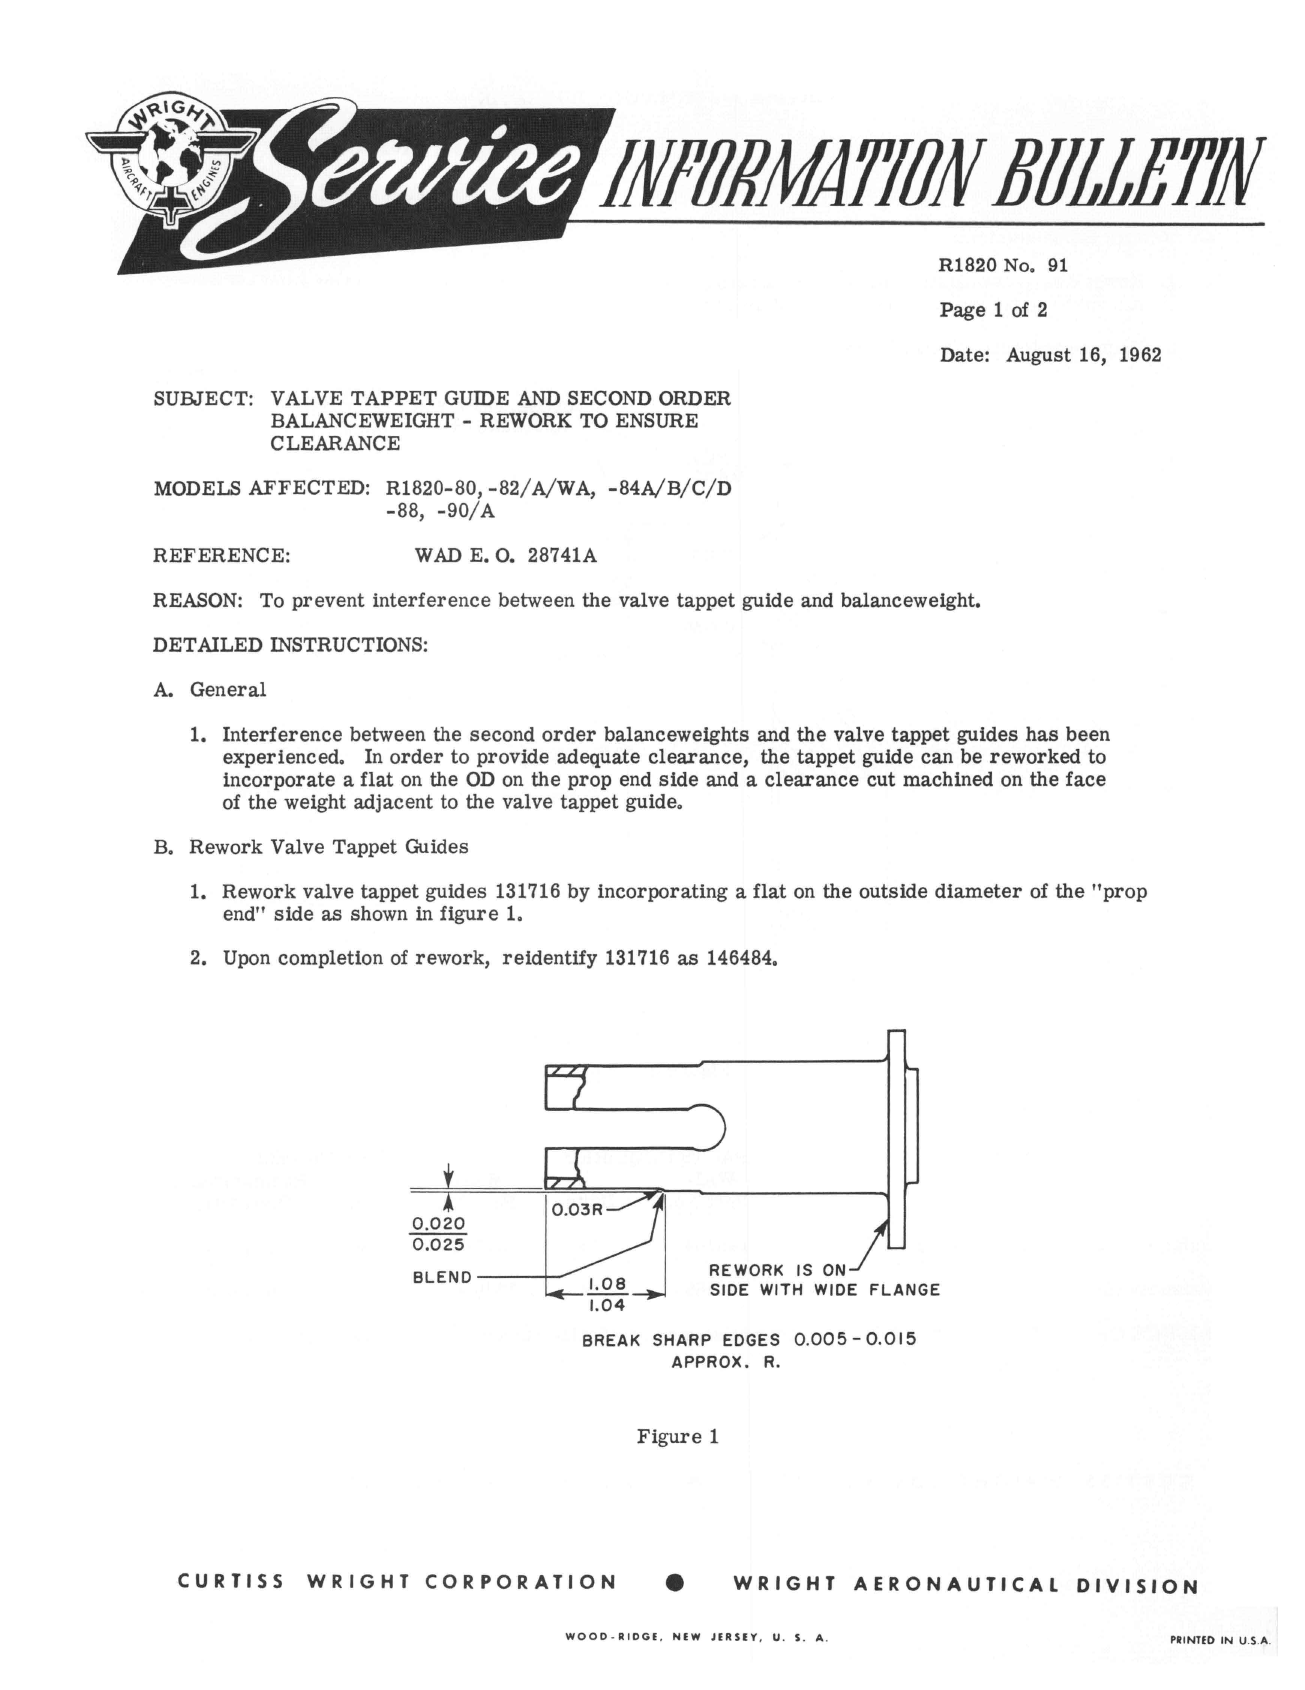 Sample page 1 from AirCorps Library document: Rework to Ensure Clearance of Valve Tapped Guide & 2nd Order Balanceweight